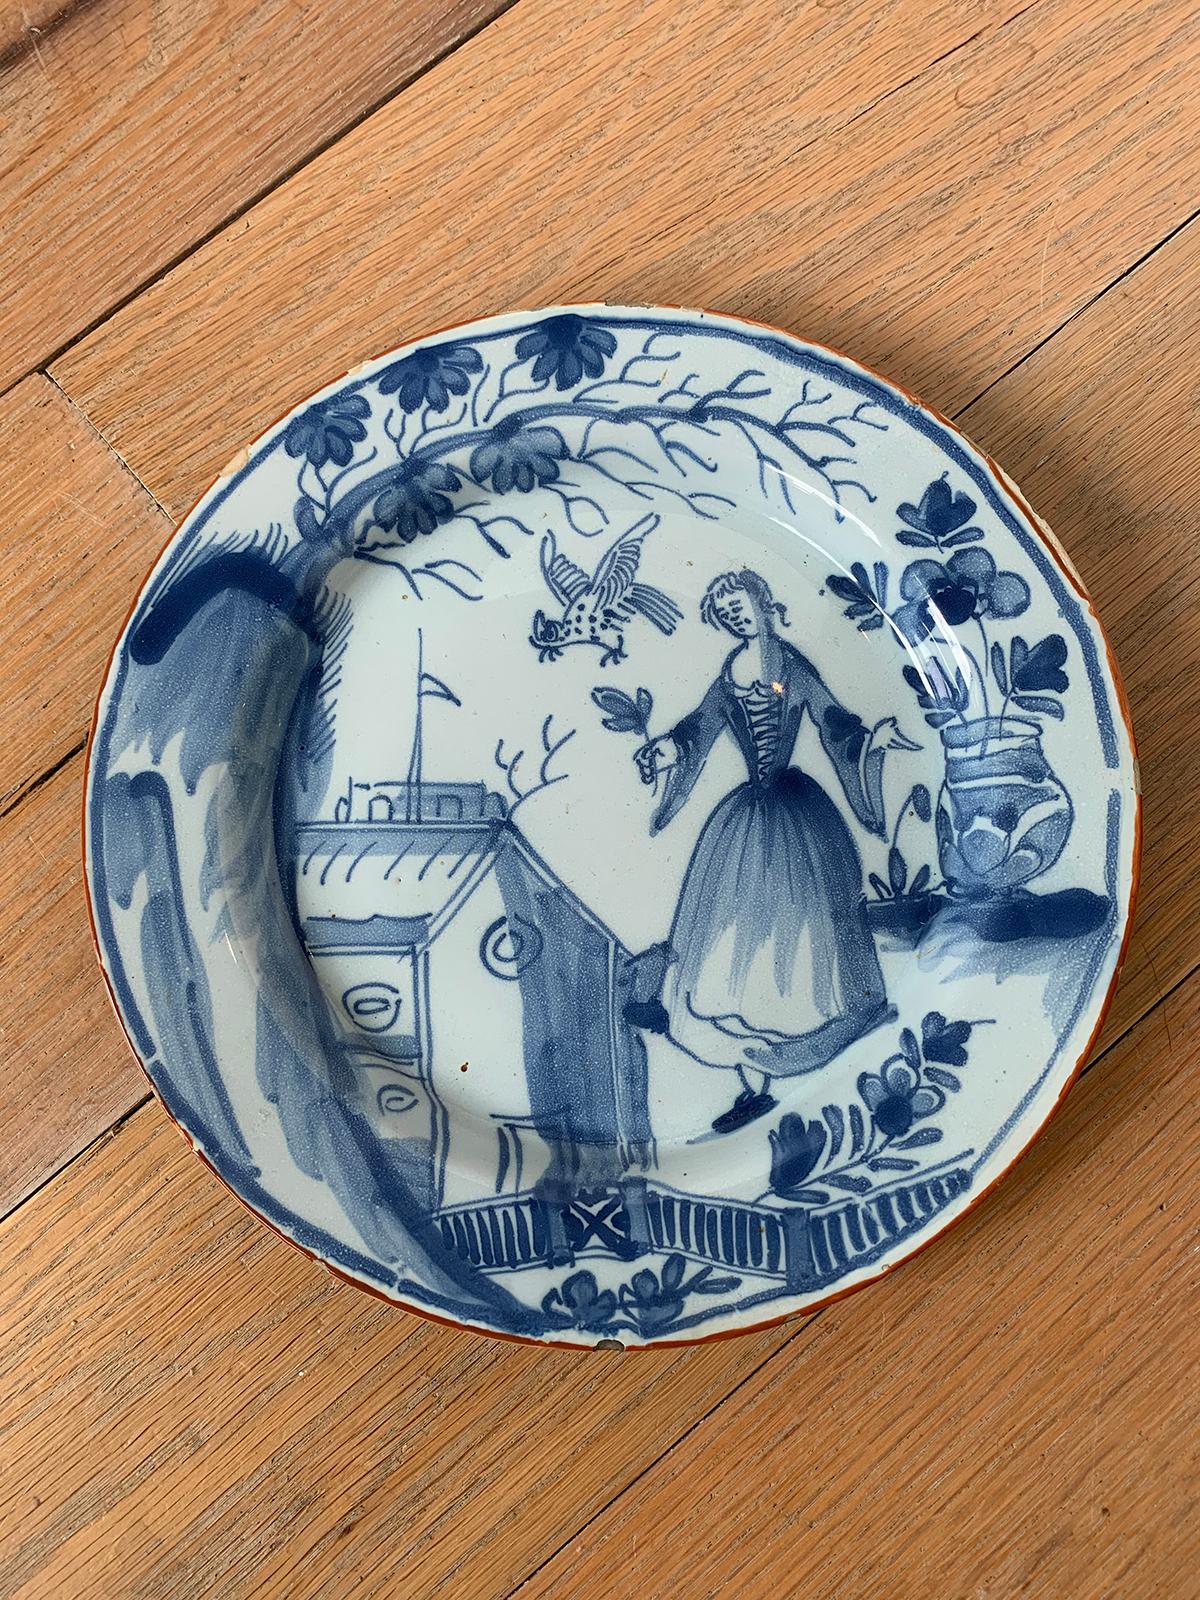 19th century continental possibly German blue and white porcelain round plate.